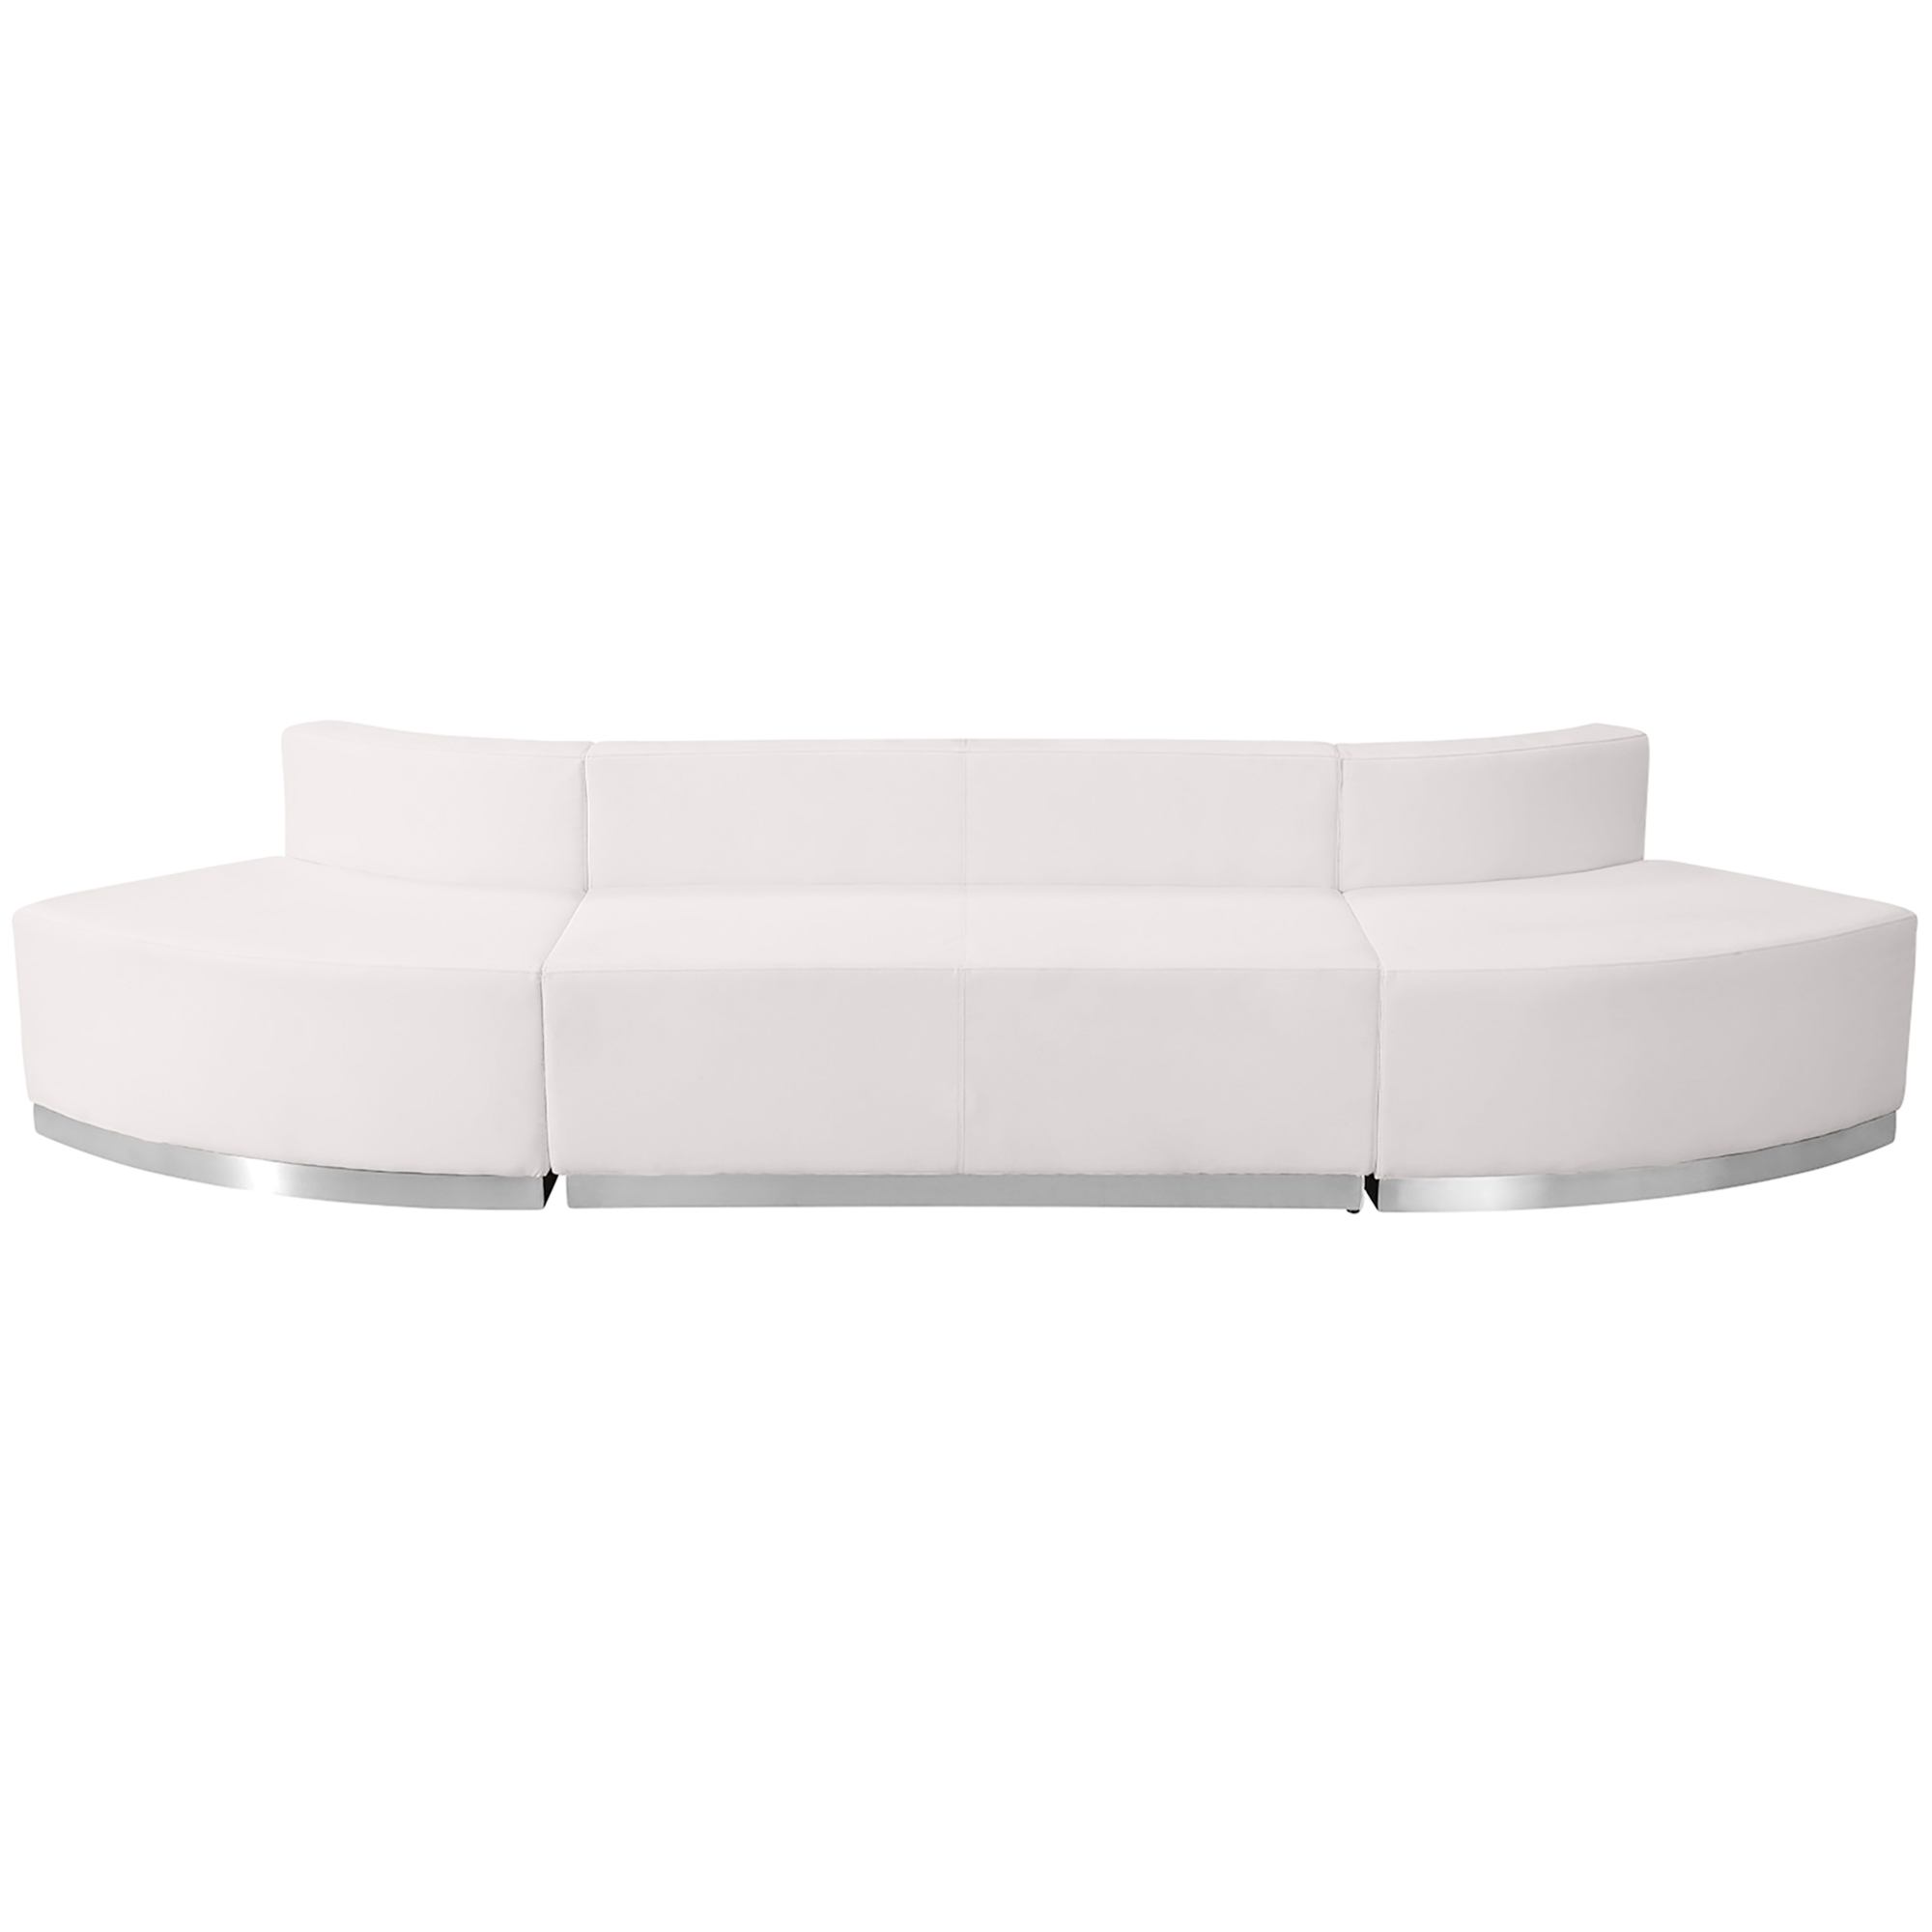 Flash Furniture, 3 PC White LeatherSoft Reception Configuration, Primary Color White, Included (qty.) 3, Model ZB803780SWH